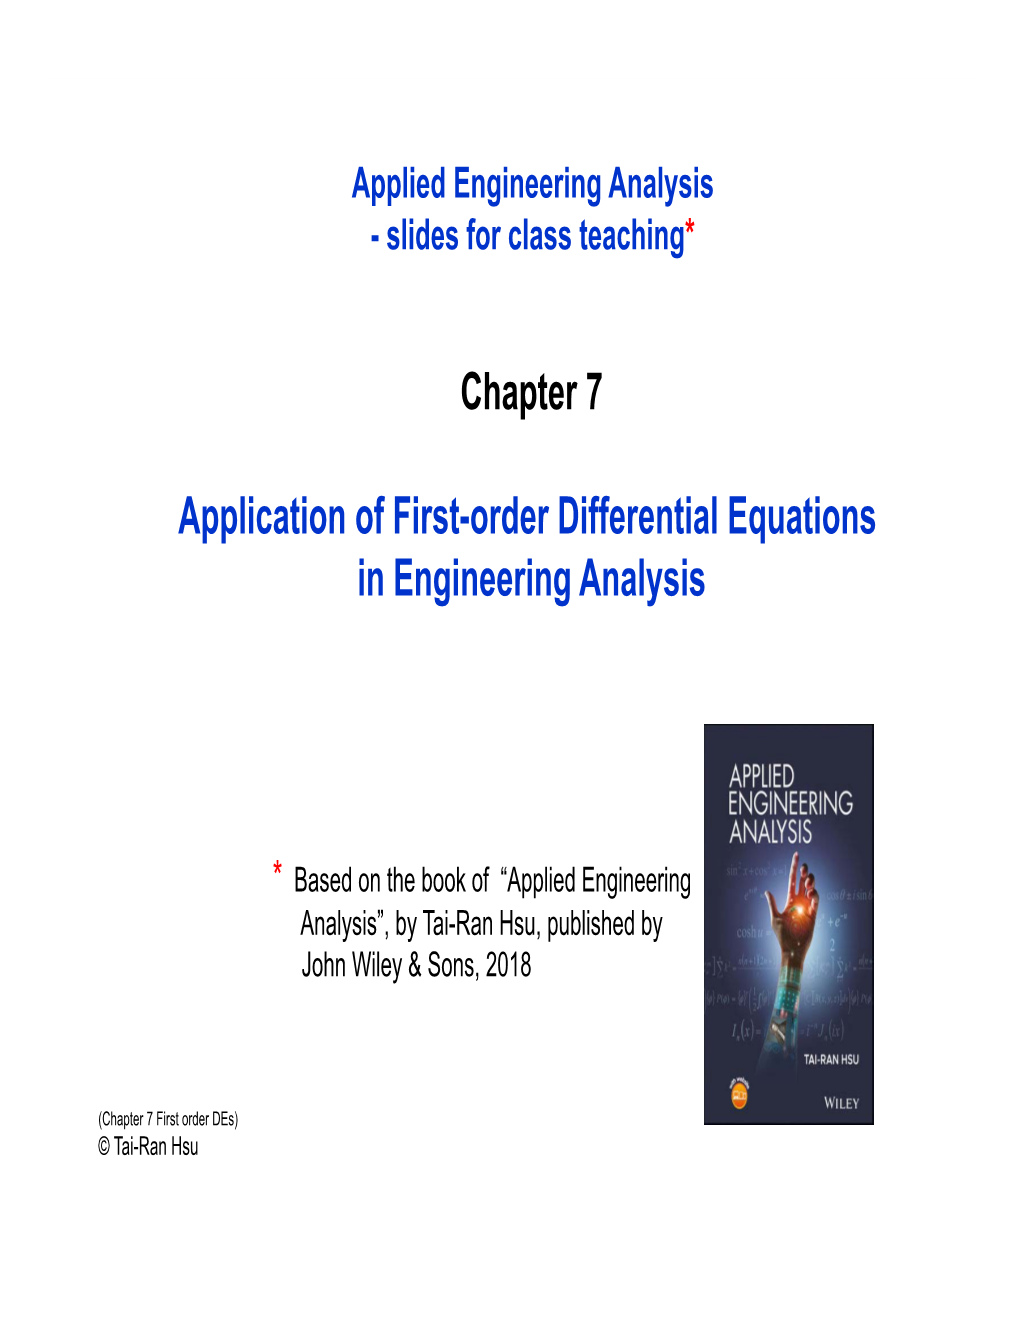 Application of First-Order Differential Equations in Engineering Analysis